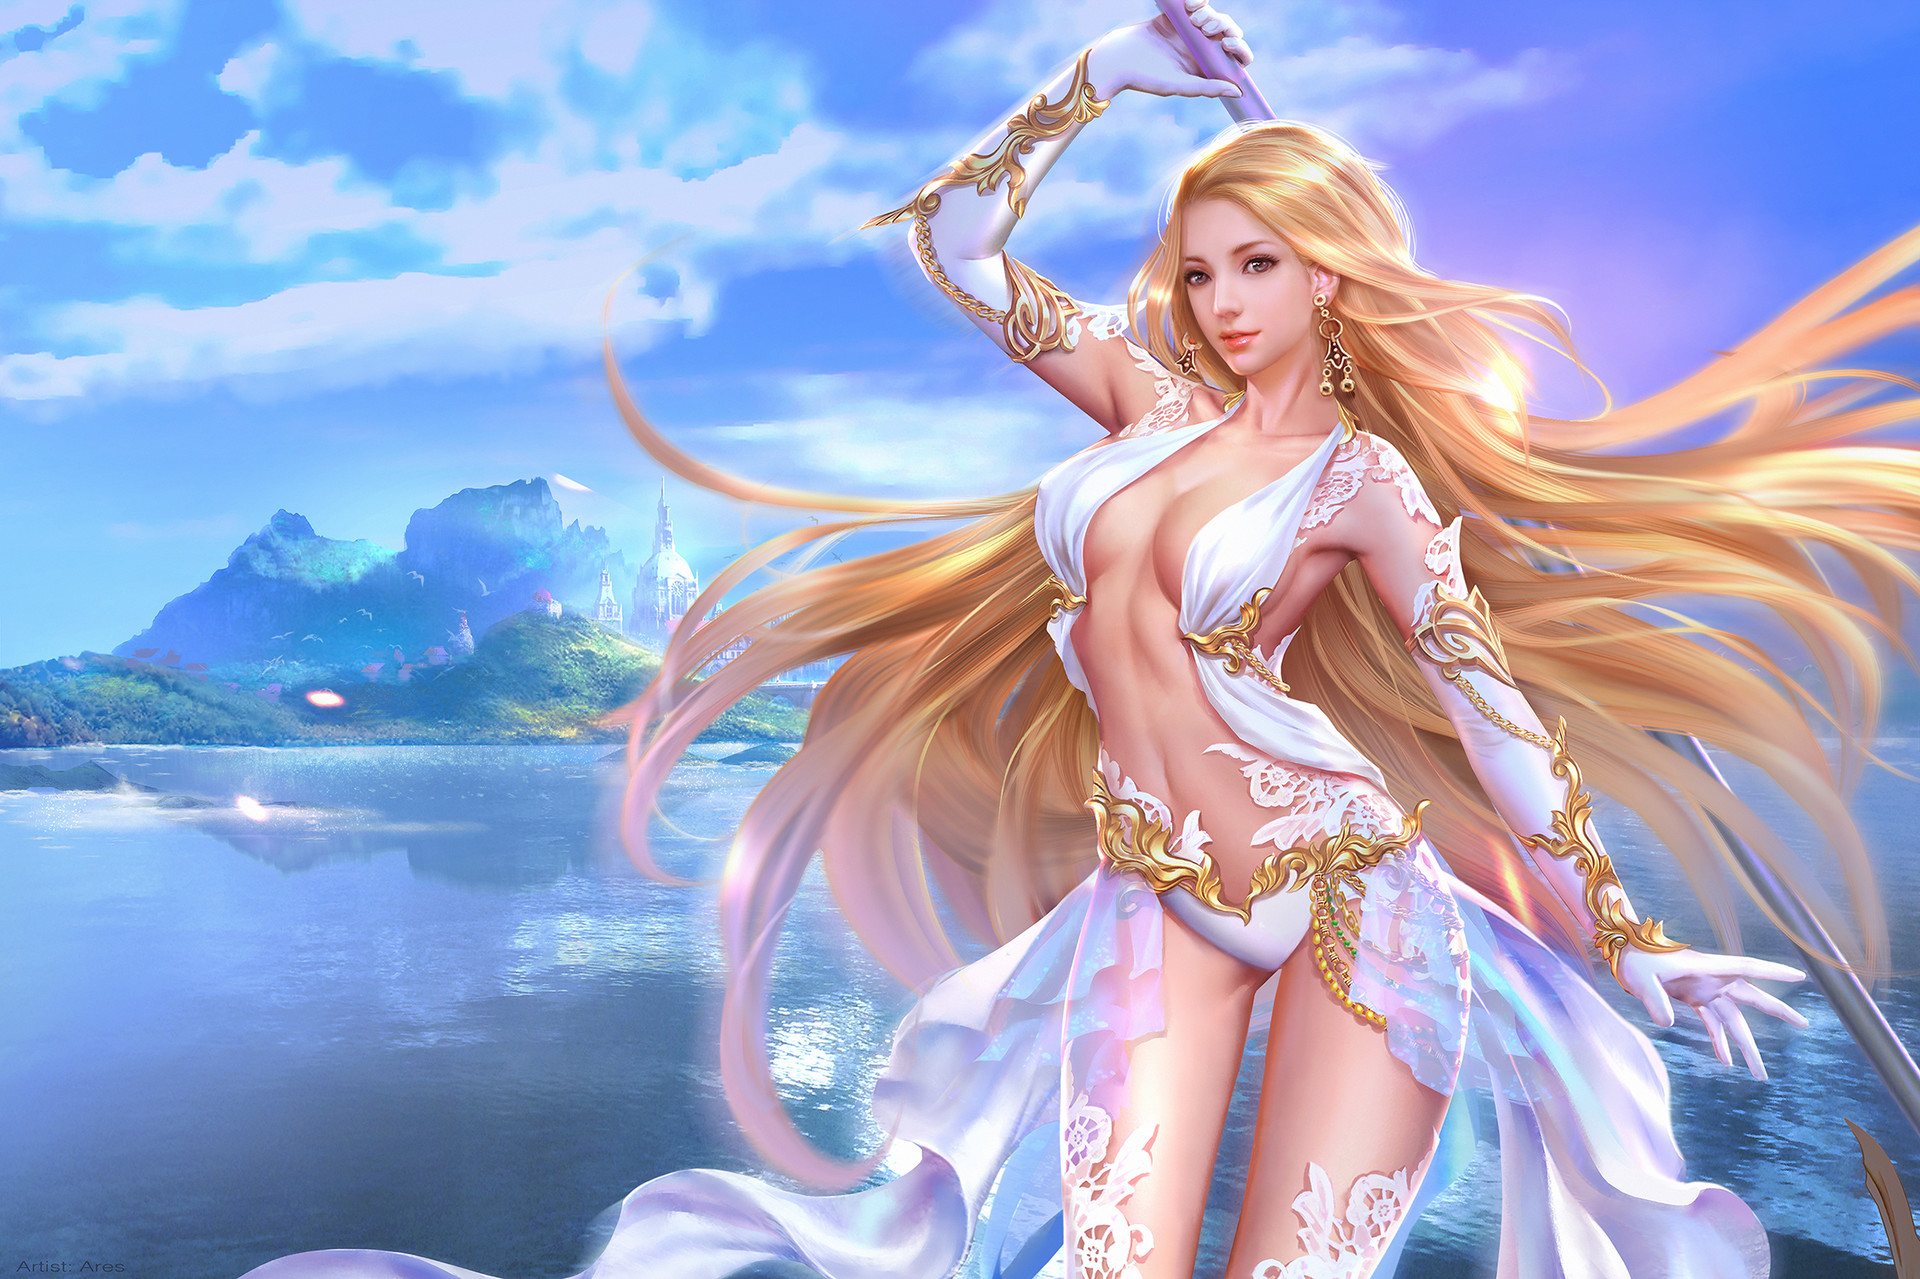 General 1920x1279 Ares drawing women blonde long hair dress white clothing sky fantasy art magician weapon staff gold jewelry reflection water digital art